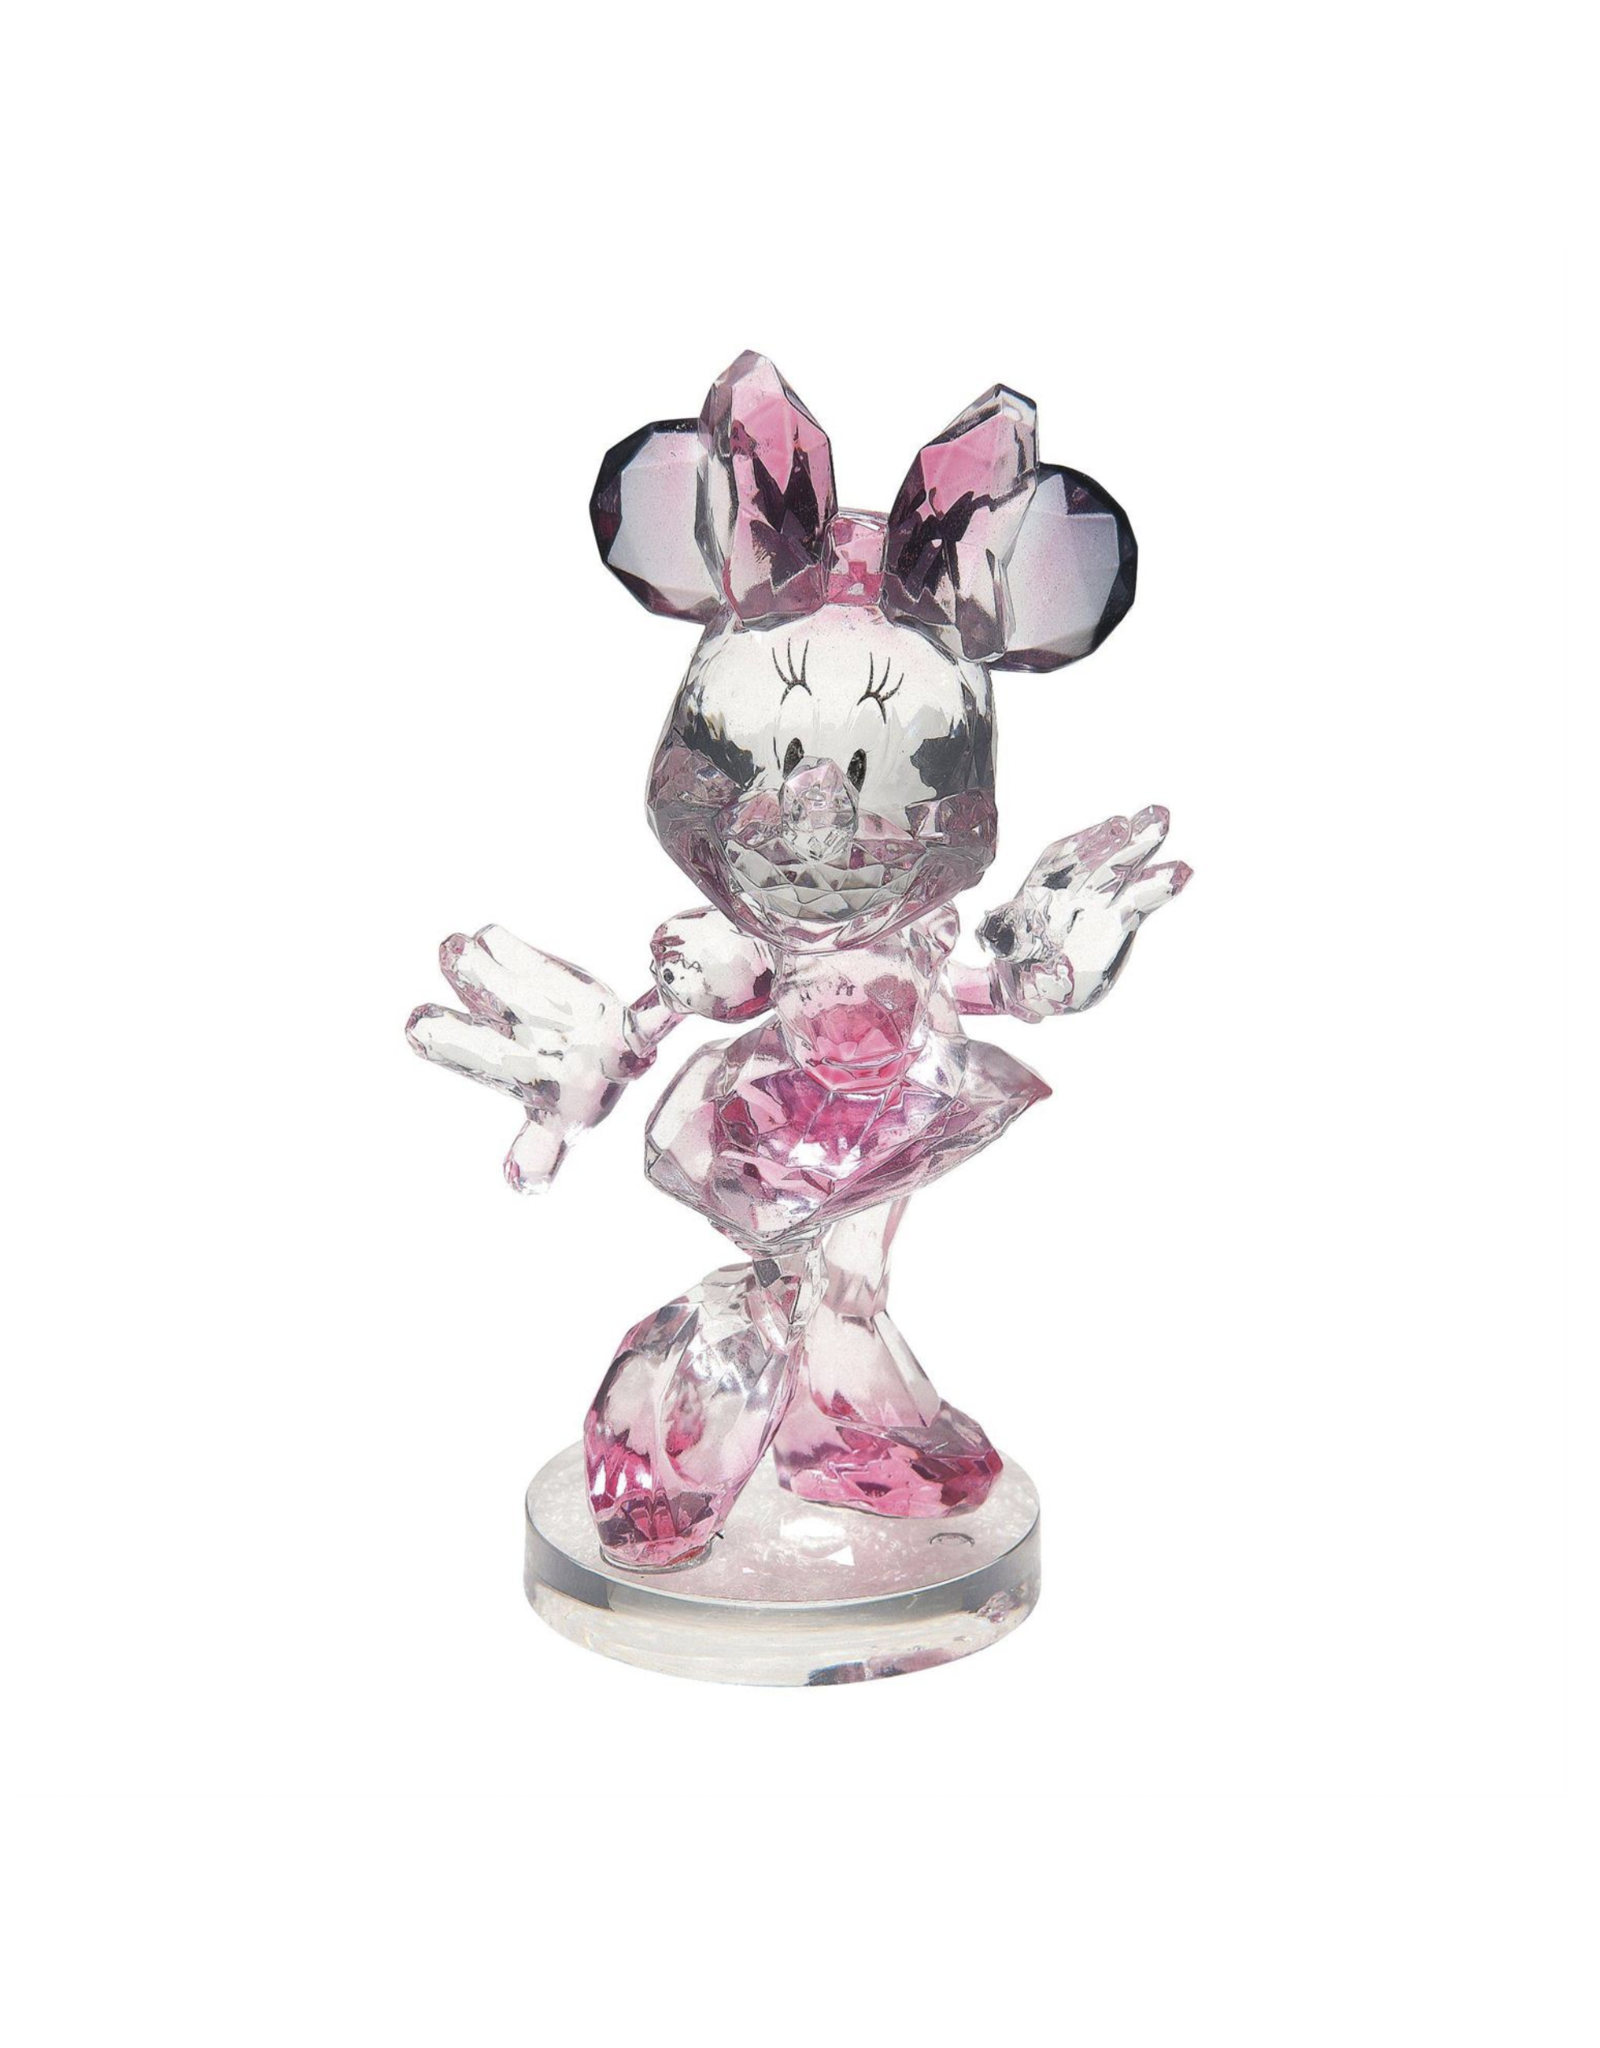 FACETS - Minnie Mouse